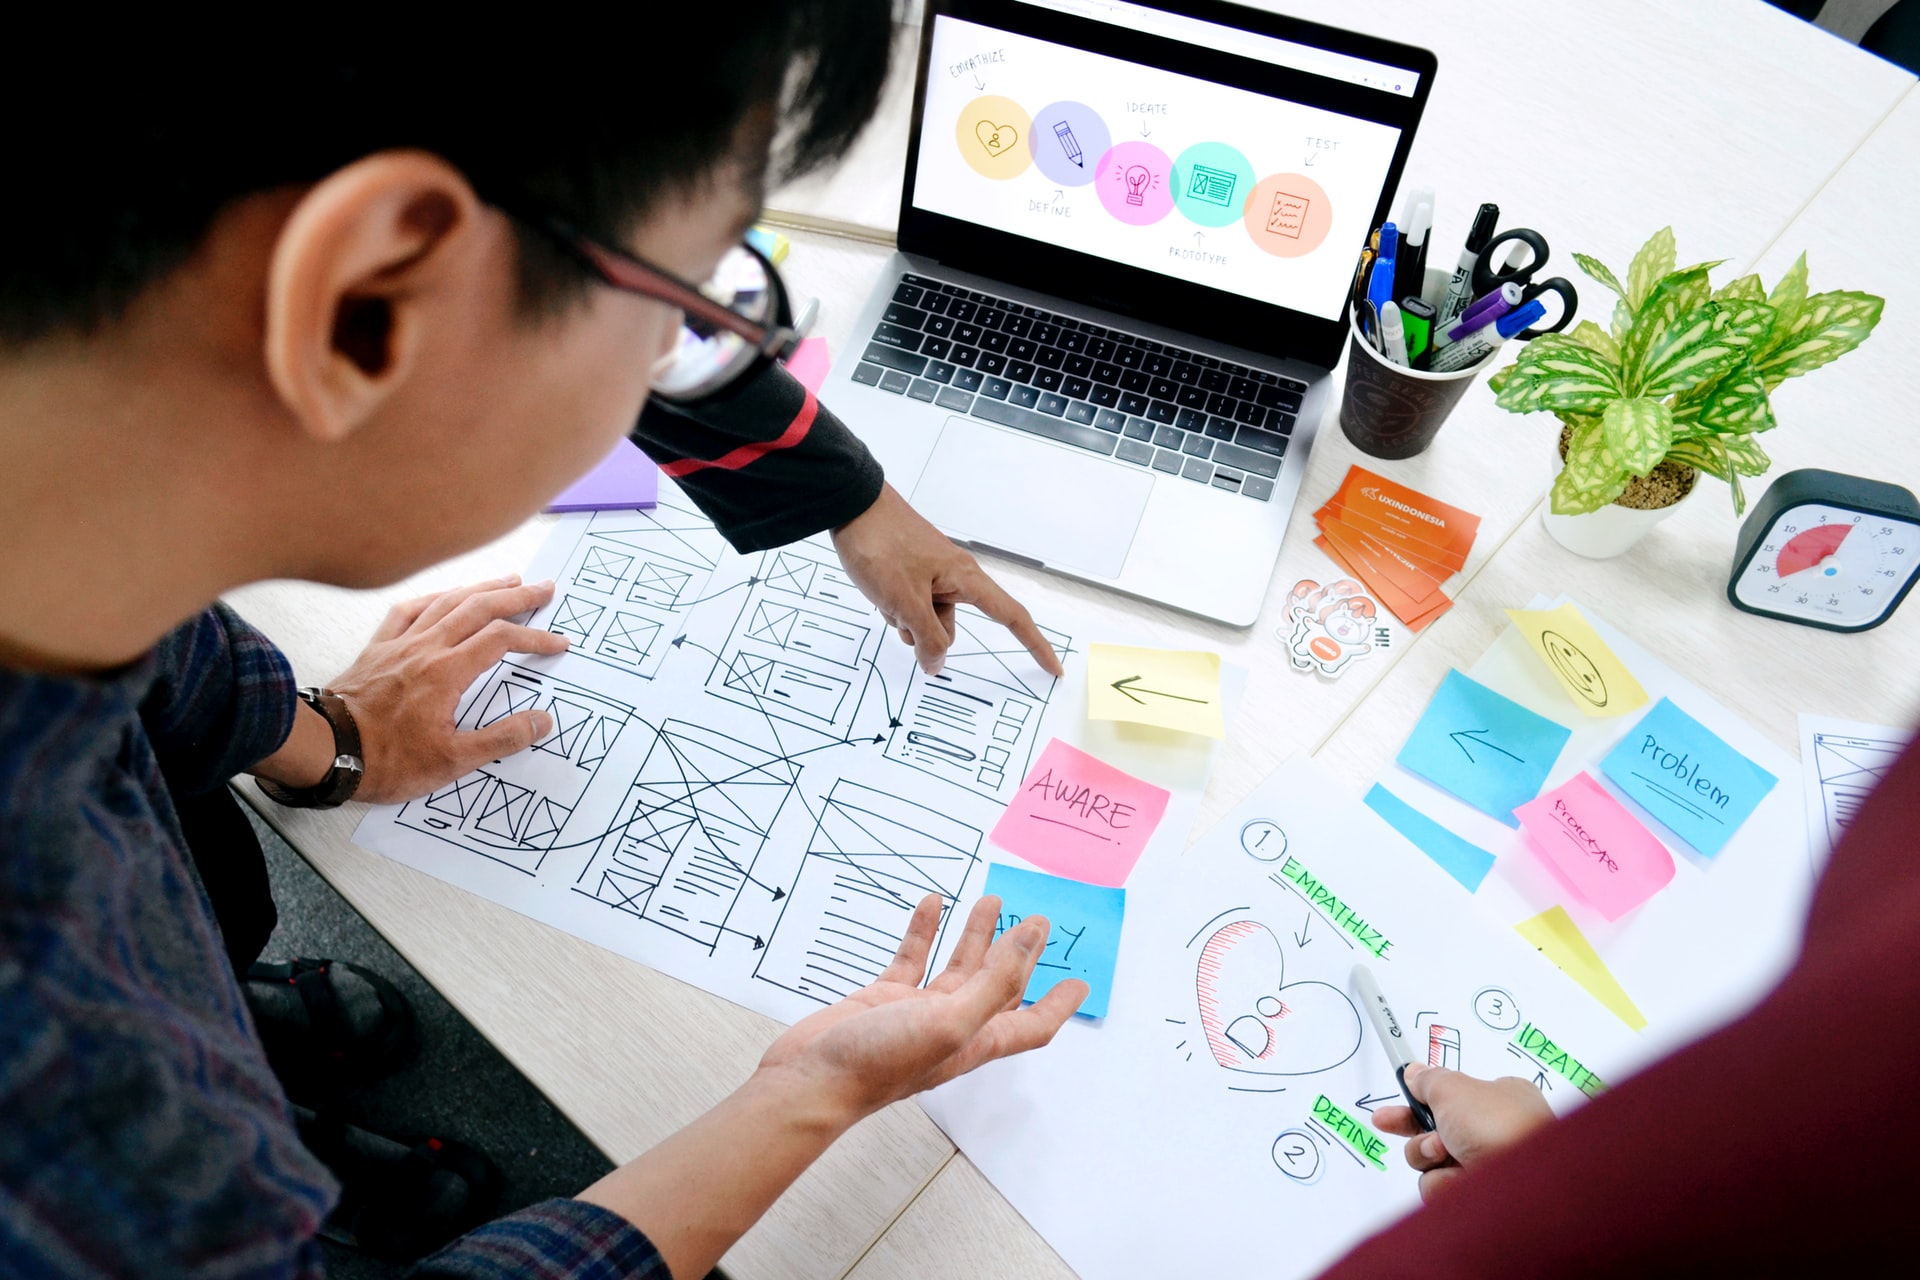 Design Thinking Exercises and Activities